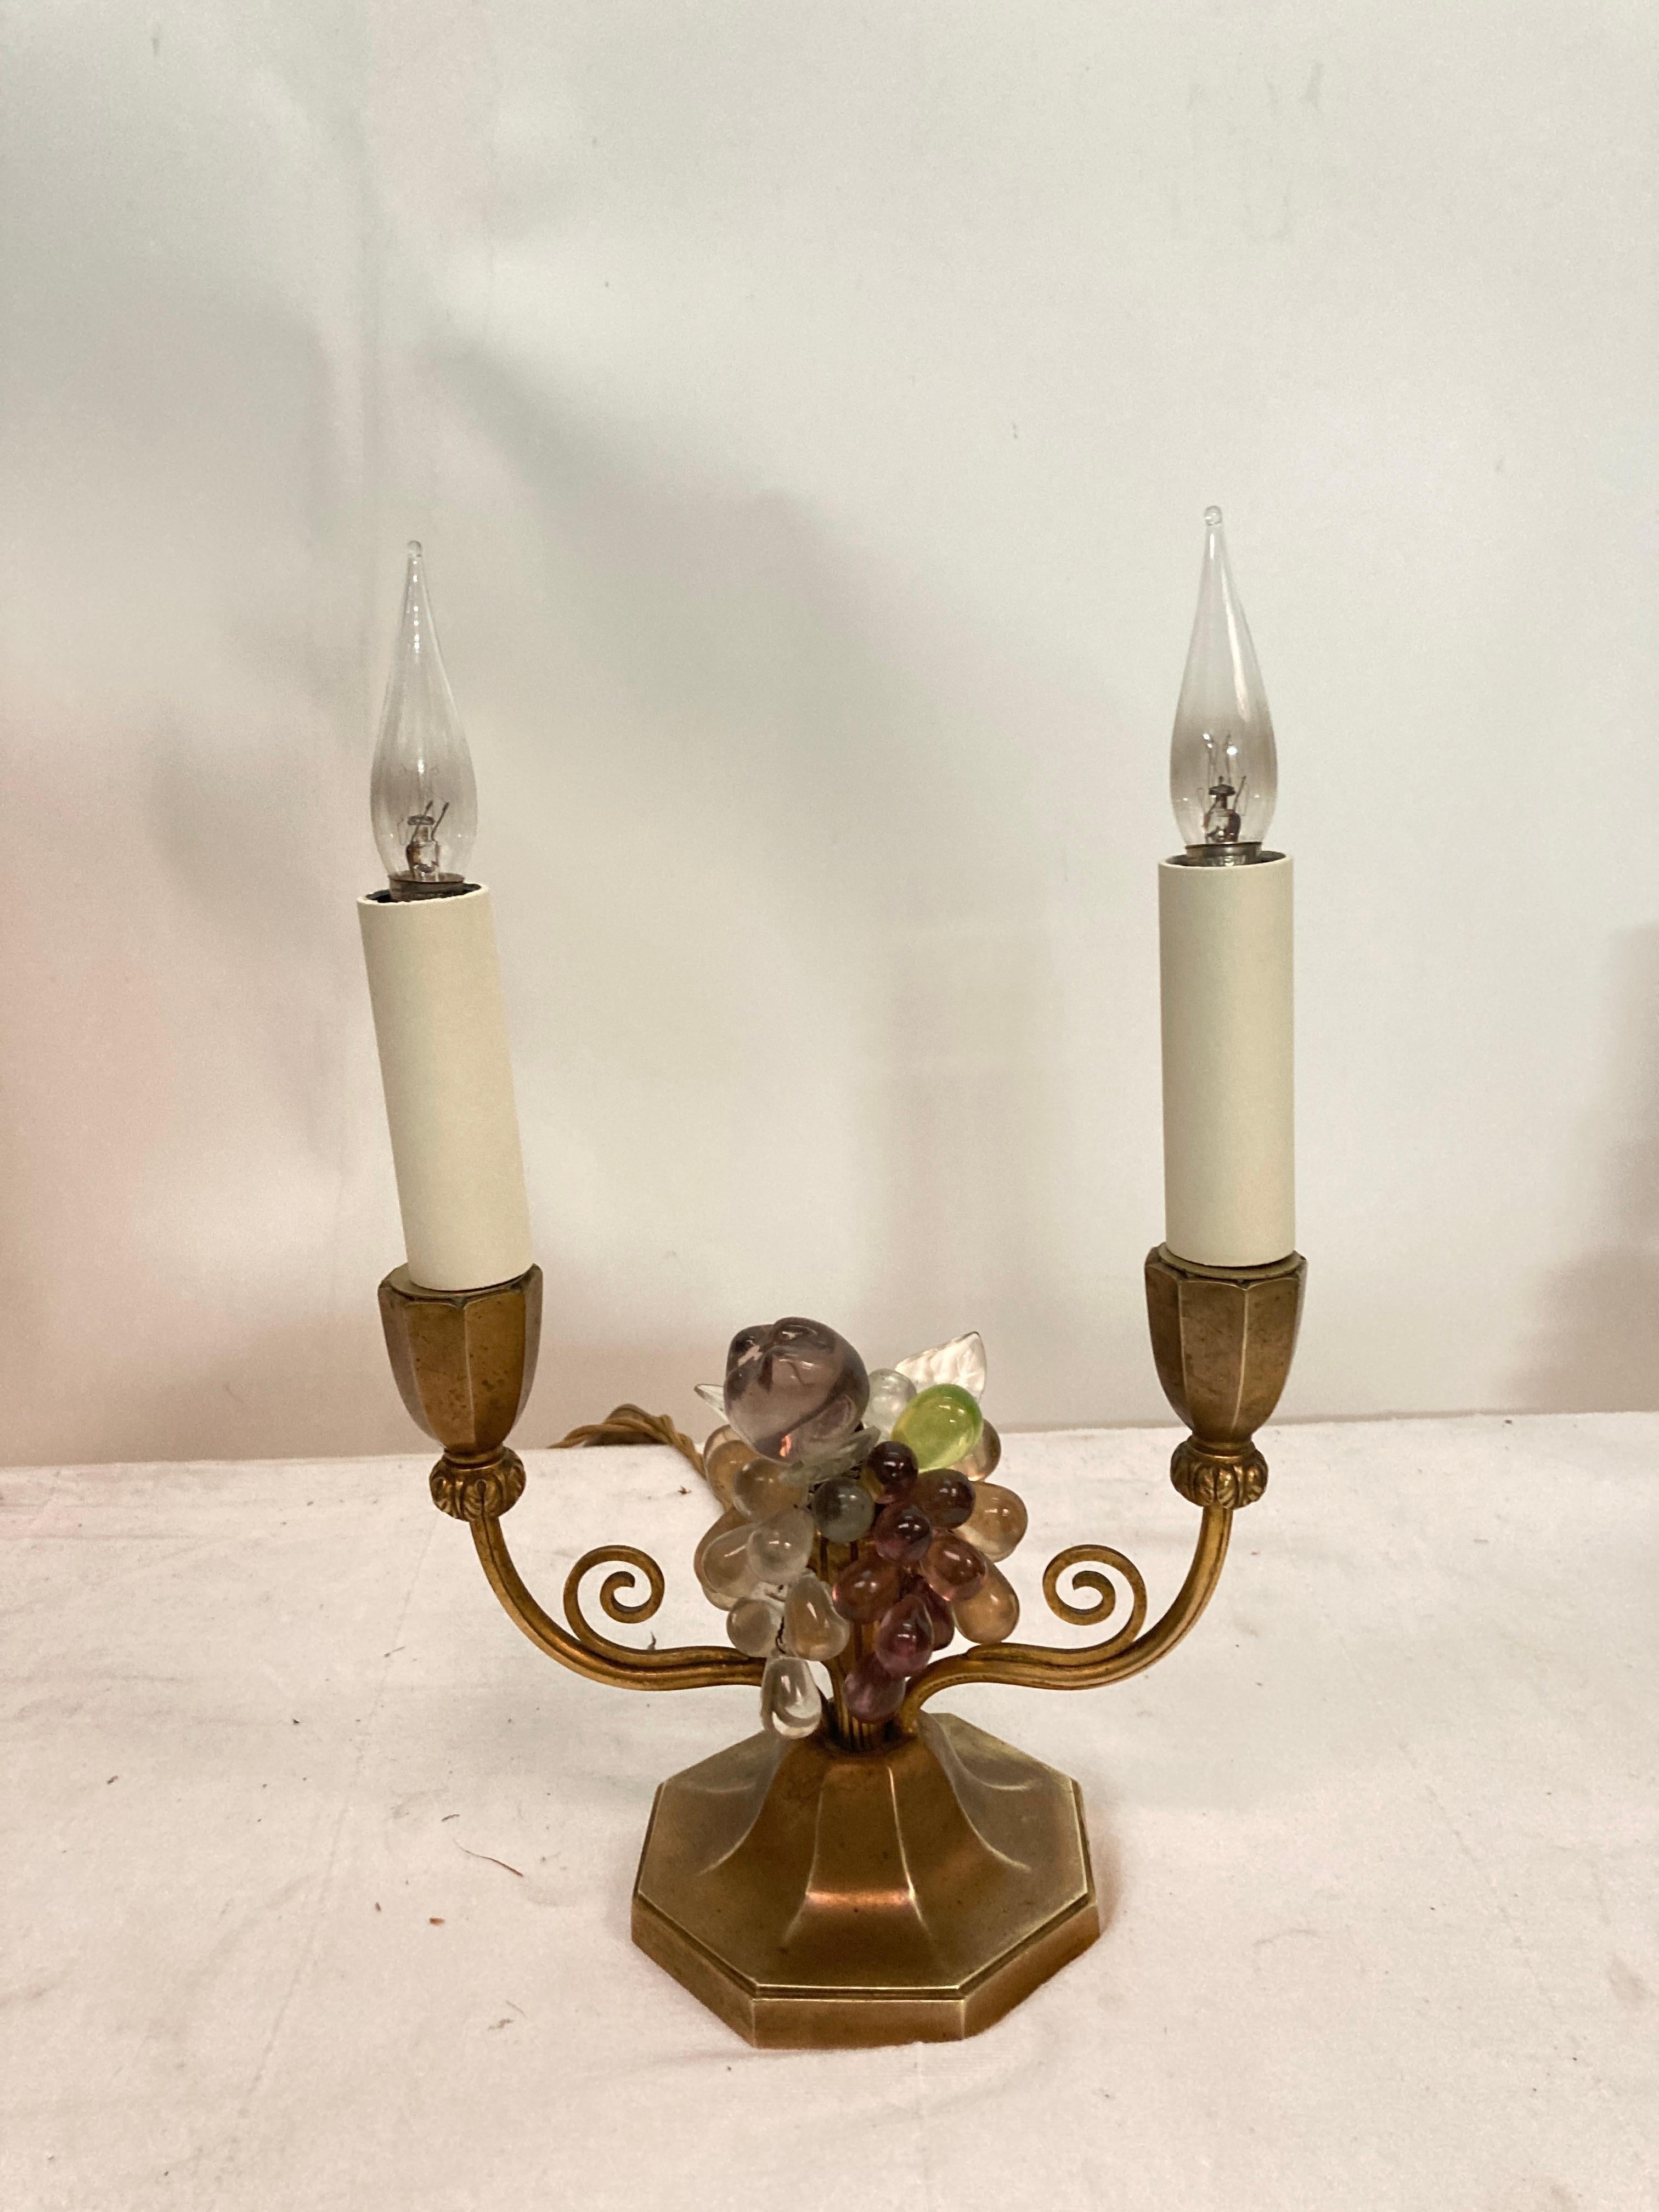 Pair of charming lamps made in bronze glass fruits.
attributed to Maison Baguès
France
Dimensions given without bulbs
With bulbs : 32 cm tall
Re-wired